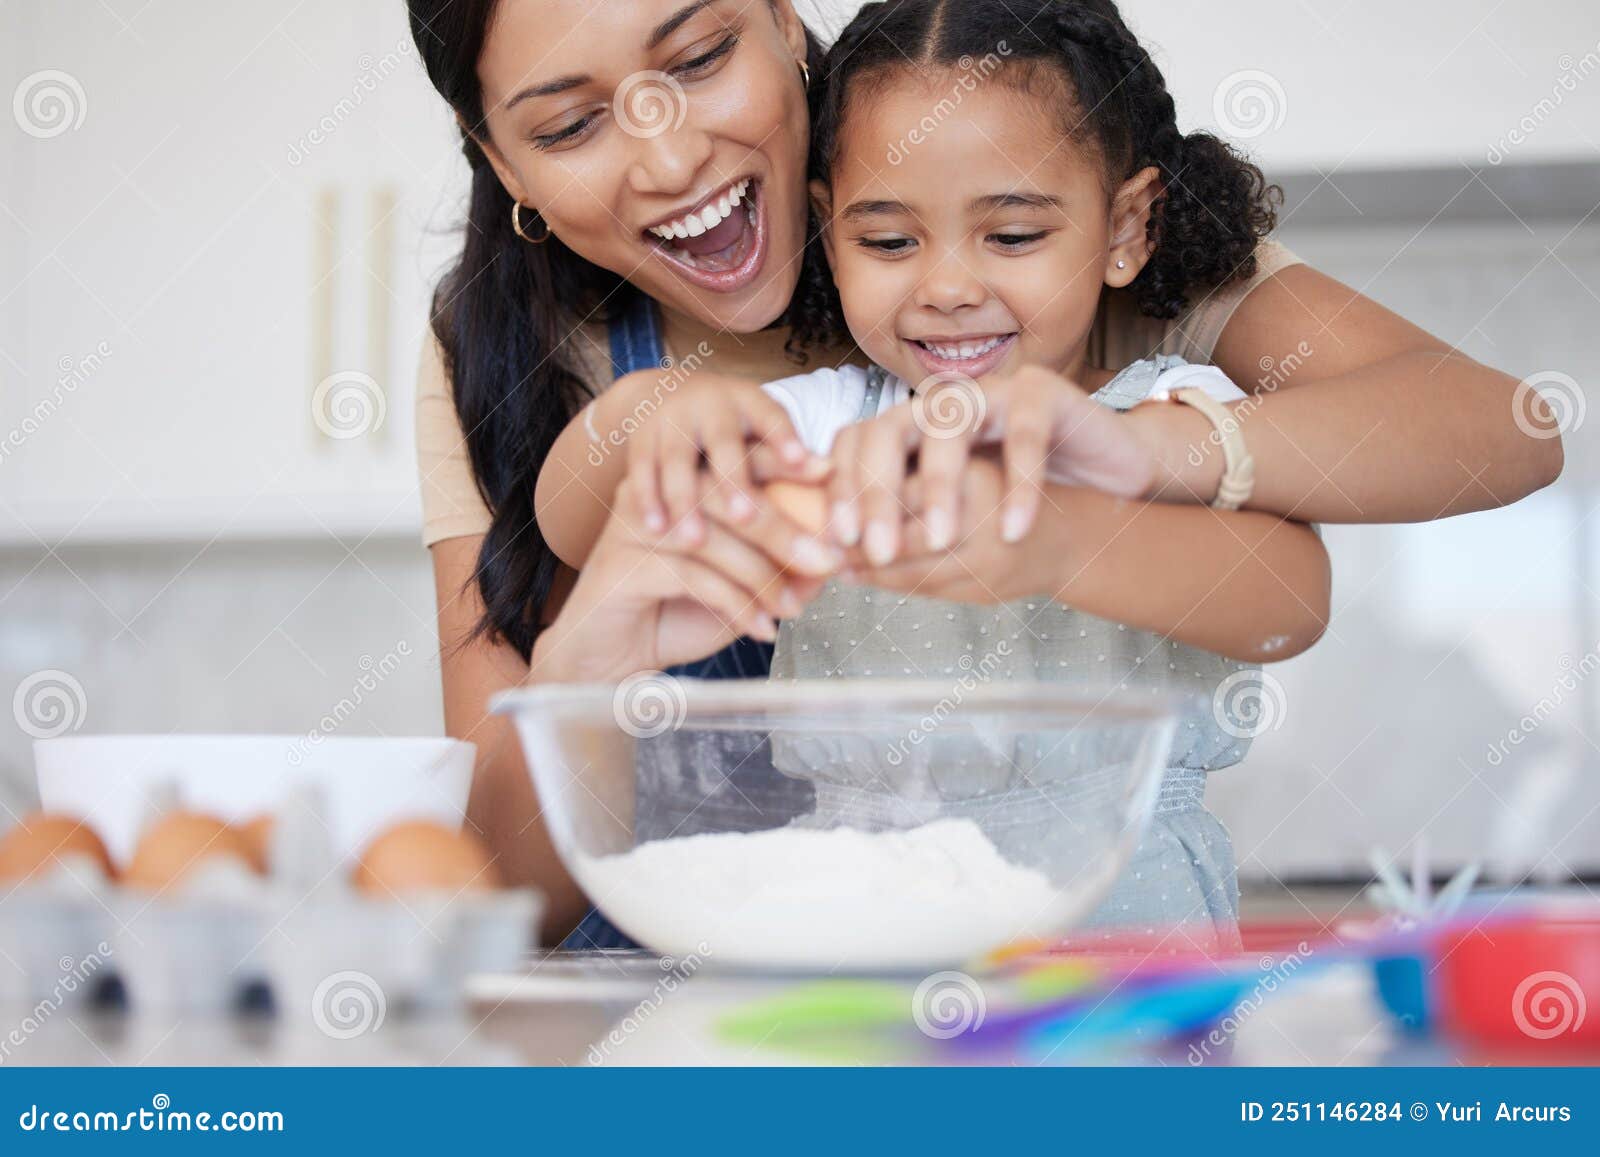 young mother enjoying baking, bonding with her little daughter in the kitchen at home. little latino girl smiling while